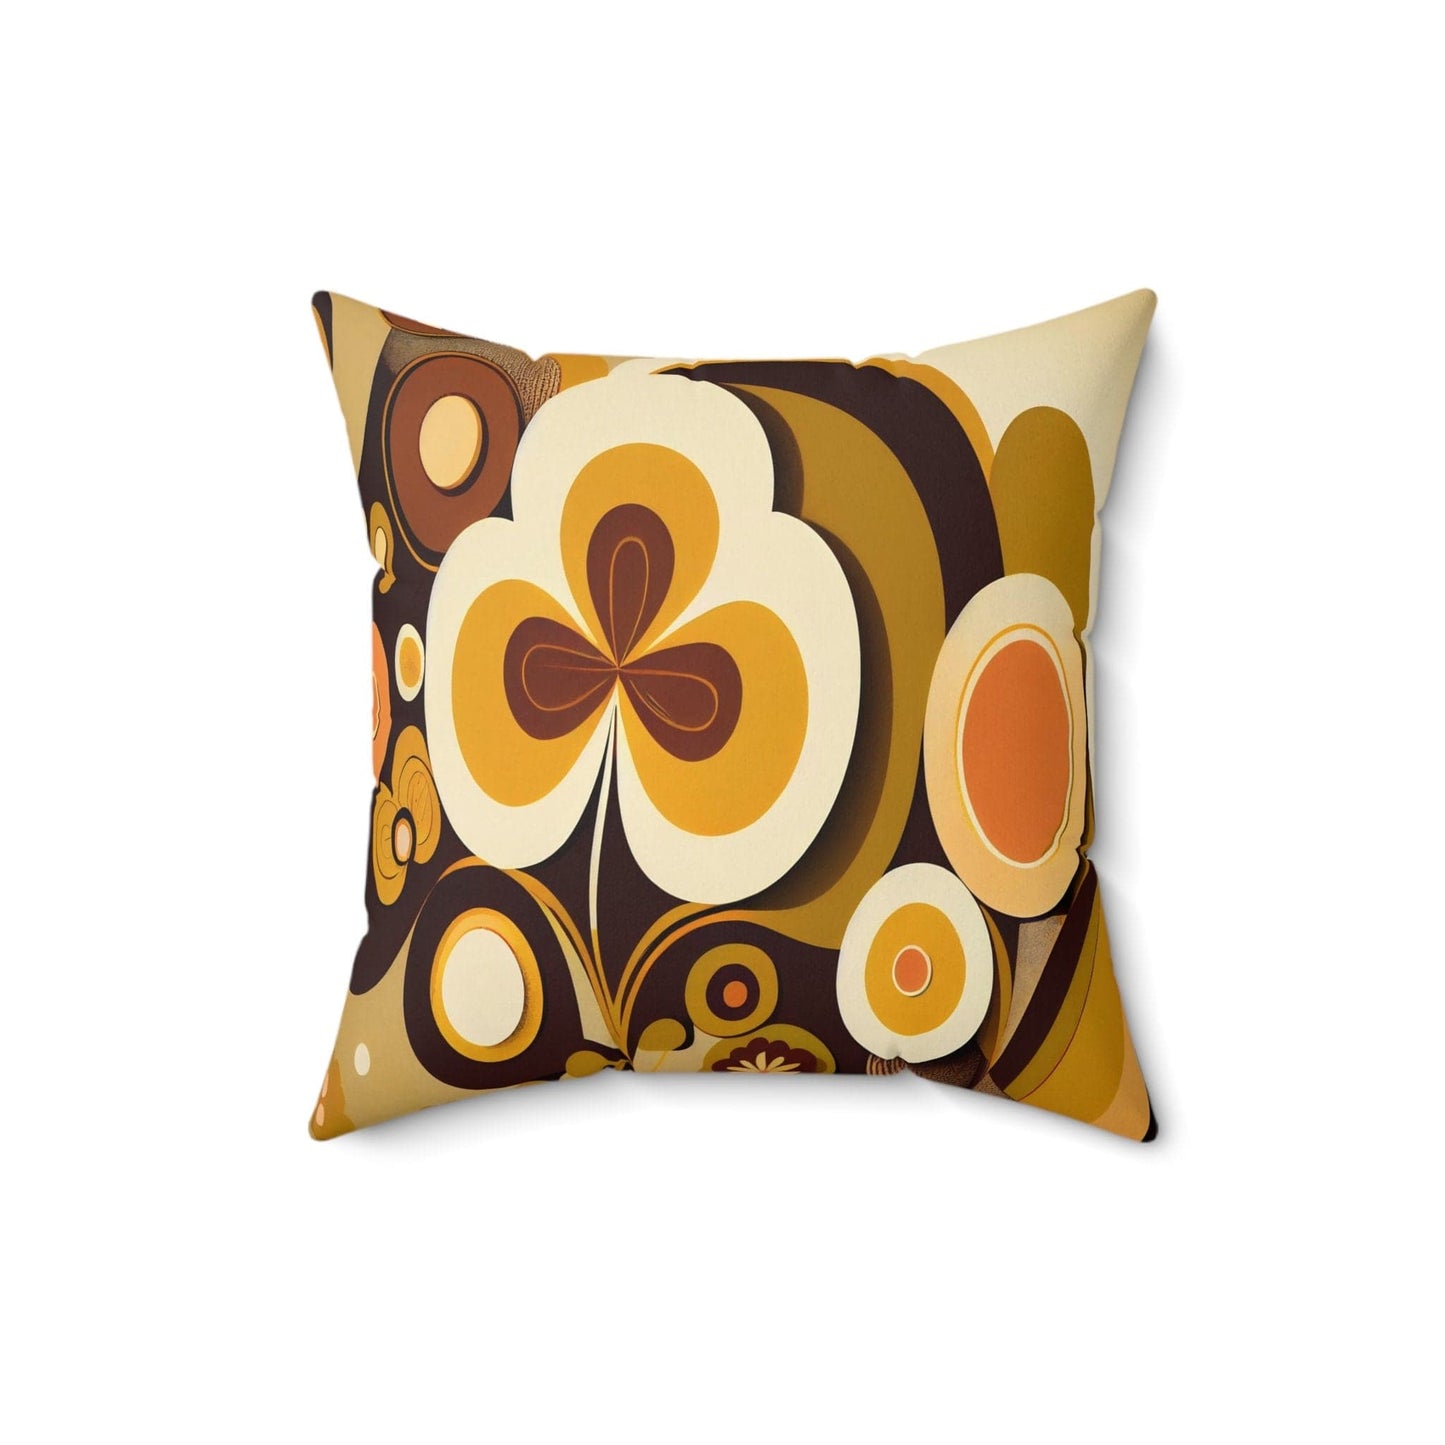 Kate McEnroe New York 60s Mid Mod Geometric Retro Floral Throw Pillow with Insert, MCM 70s Groovy, Hippie Bold Abstract Living Room, Bedroom Decor - 122981223 Throw Pillows